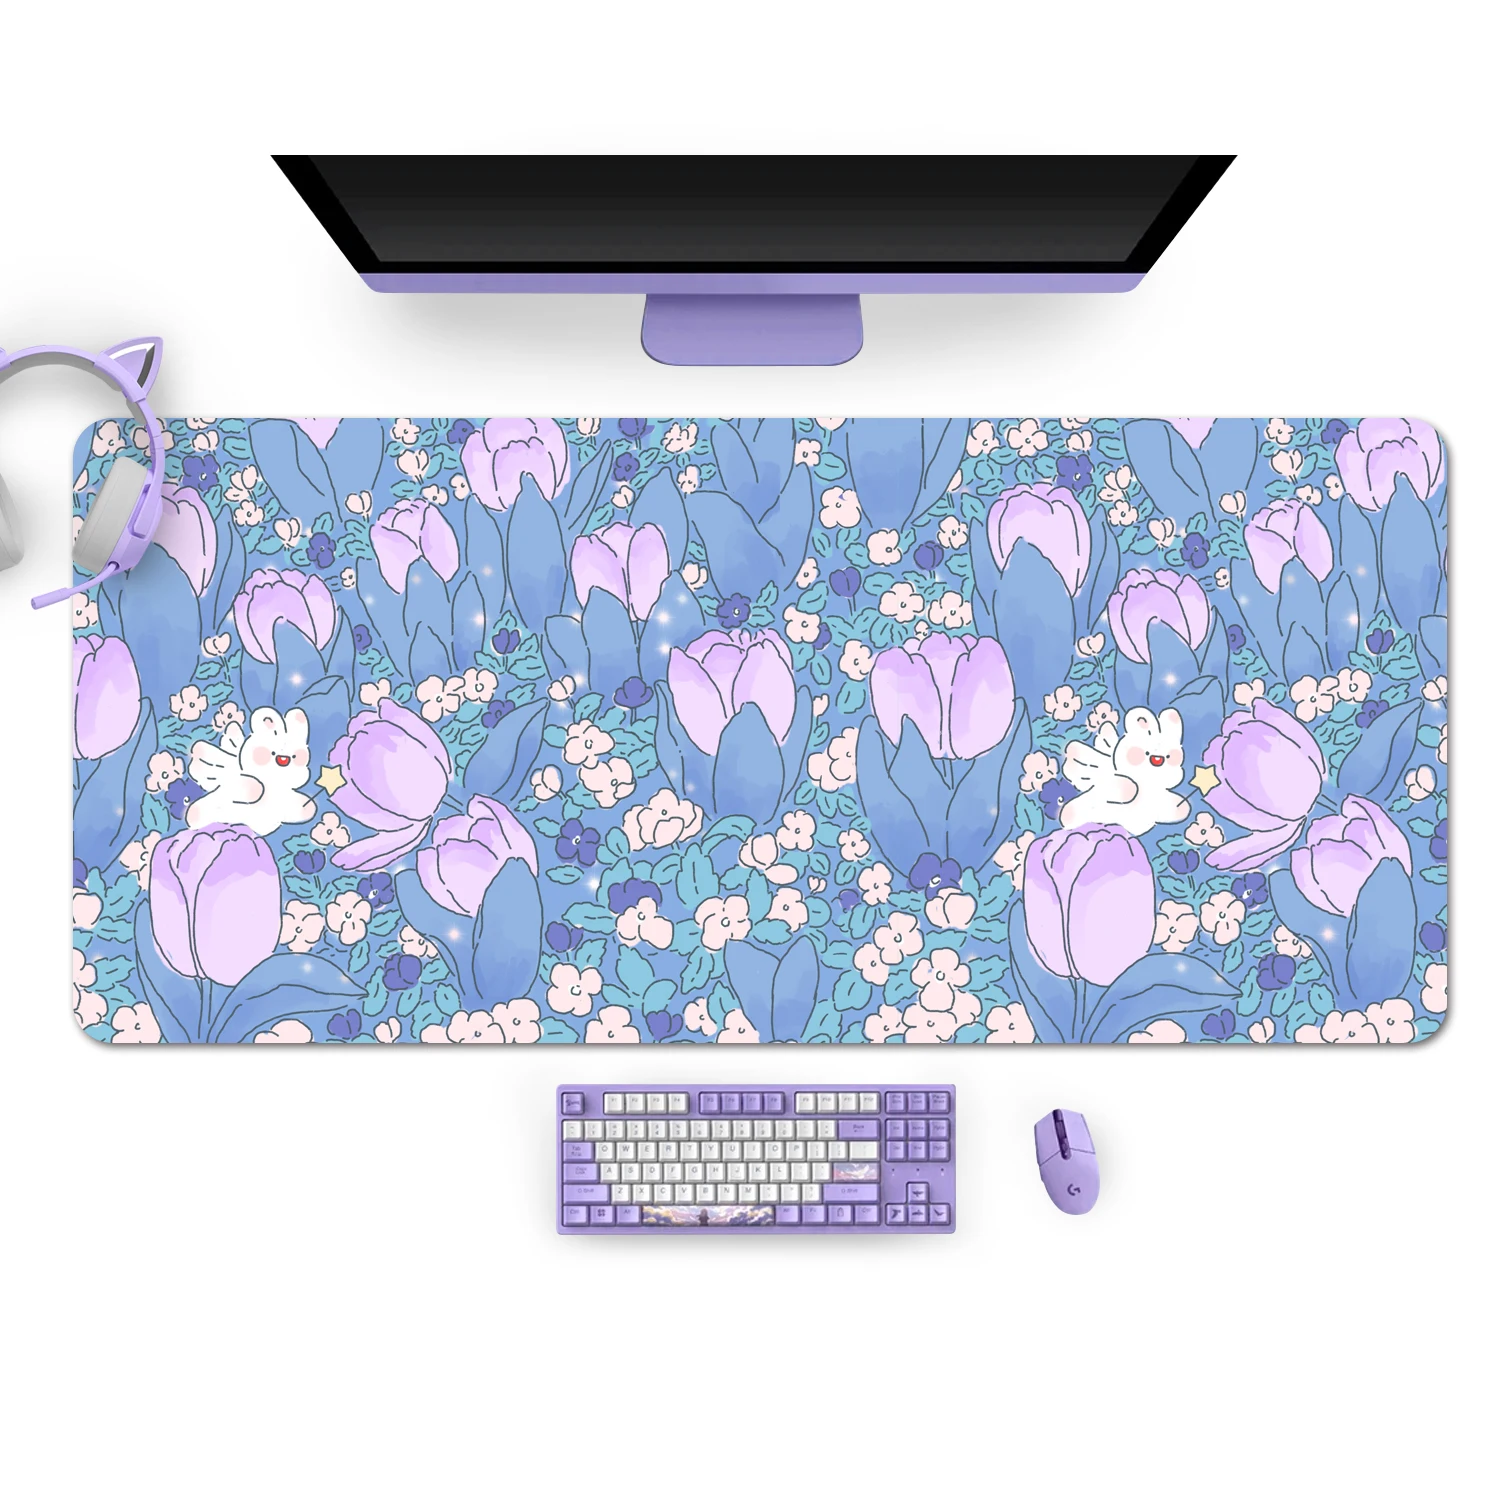 Extra Large Kawaii Purple Gaming Mouse Pad Cute Tulips Flower Bunny XXL Desk Mat Water Proof Nonslip Laptop Desk Accessories